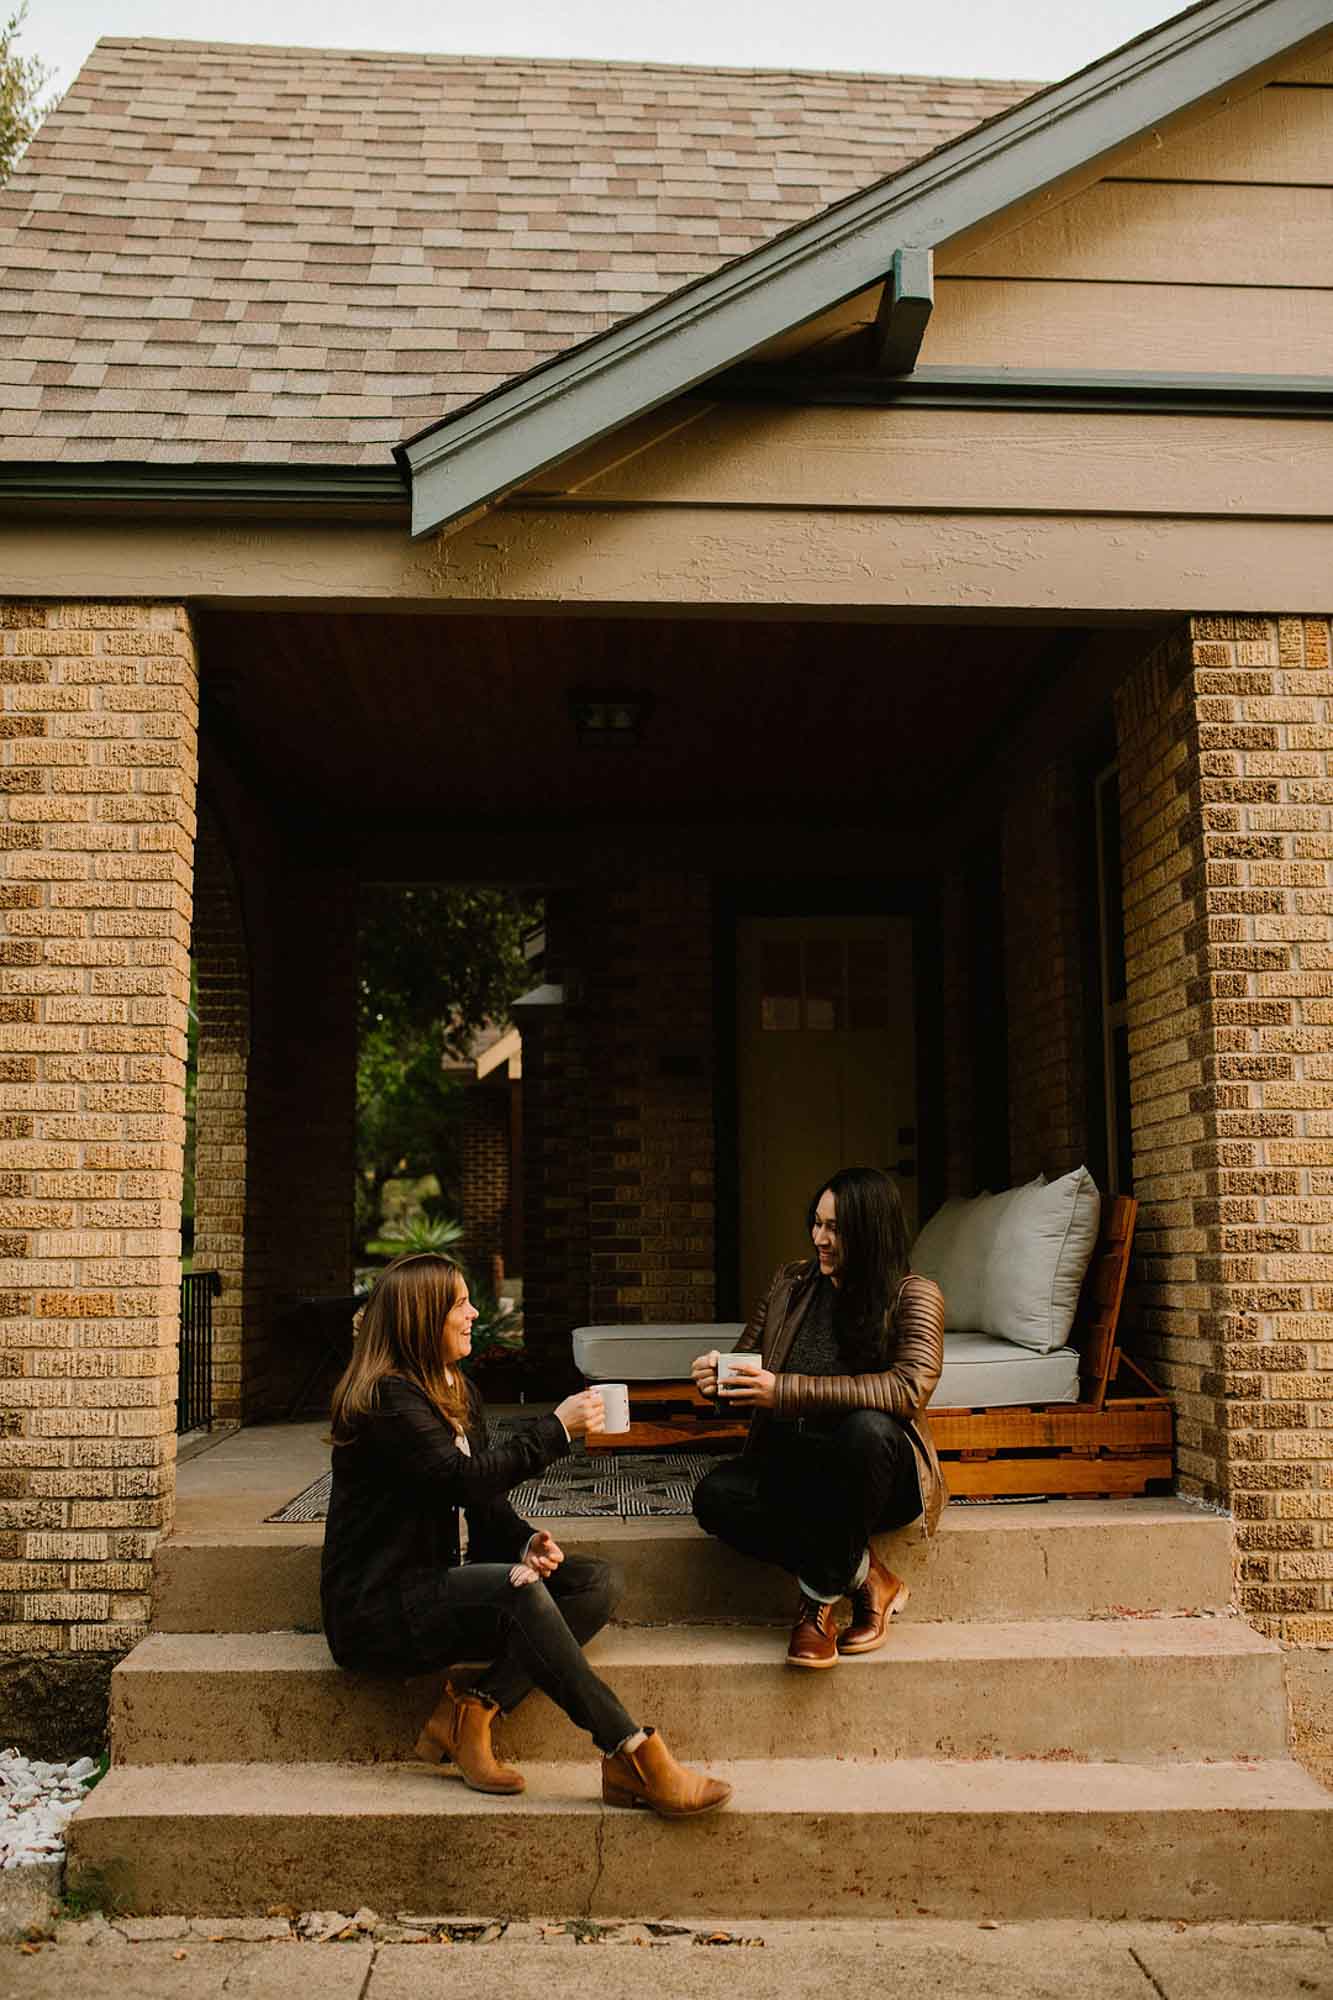 Cozy at home proposal with coffee and kisses | Whitney Rogers Photography | Featured on Equally Wed, the leading LGBTQ+ wedding magazine - coffee, house, leather jackets